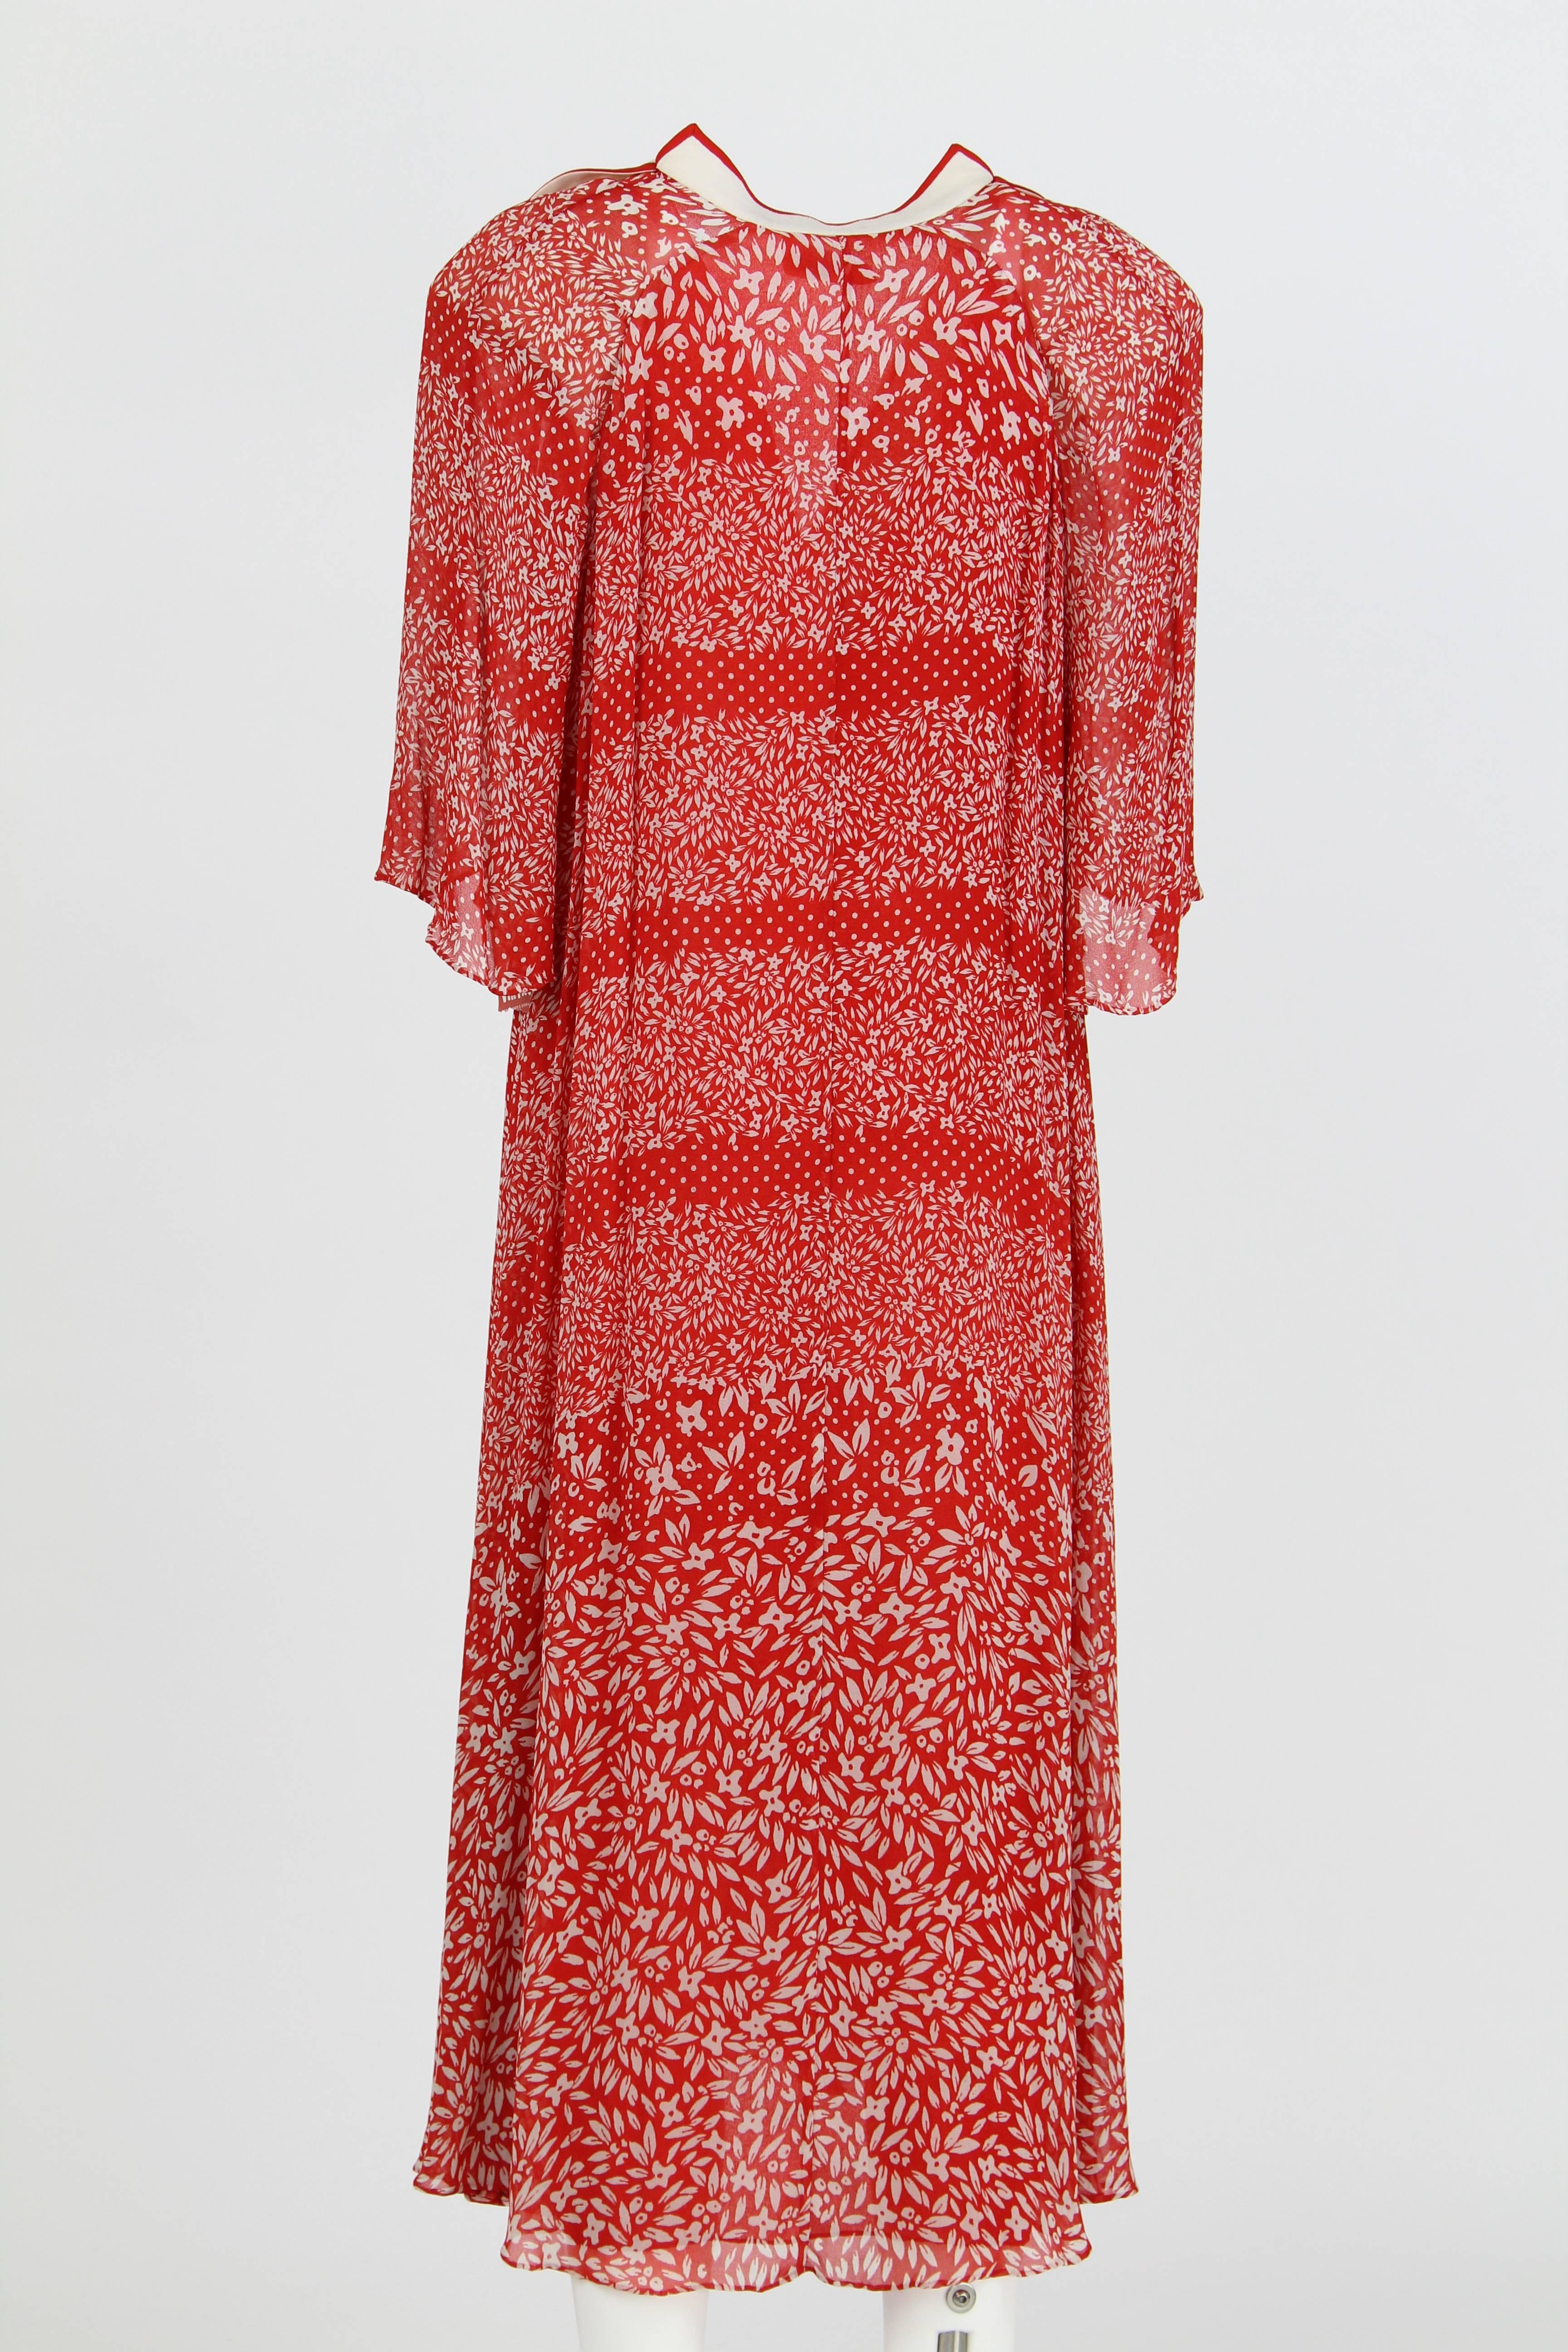 1970S Renato Balestra red and white mid-length dress featuring a delicate floral pattern, a v-neck and a wide collar.
This item is in good conditions.
Made in Italy.
Size 42 IT.